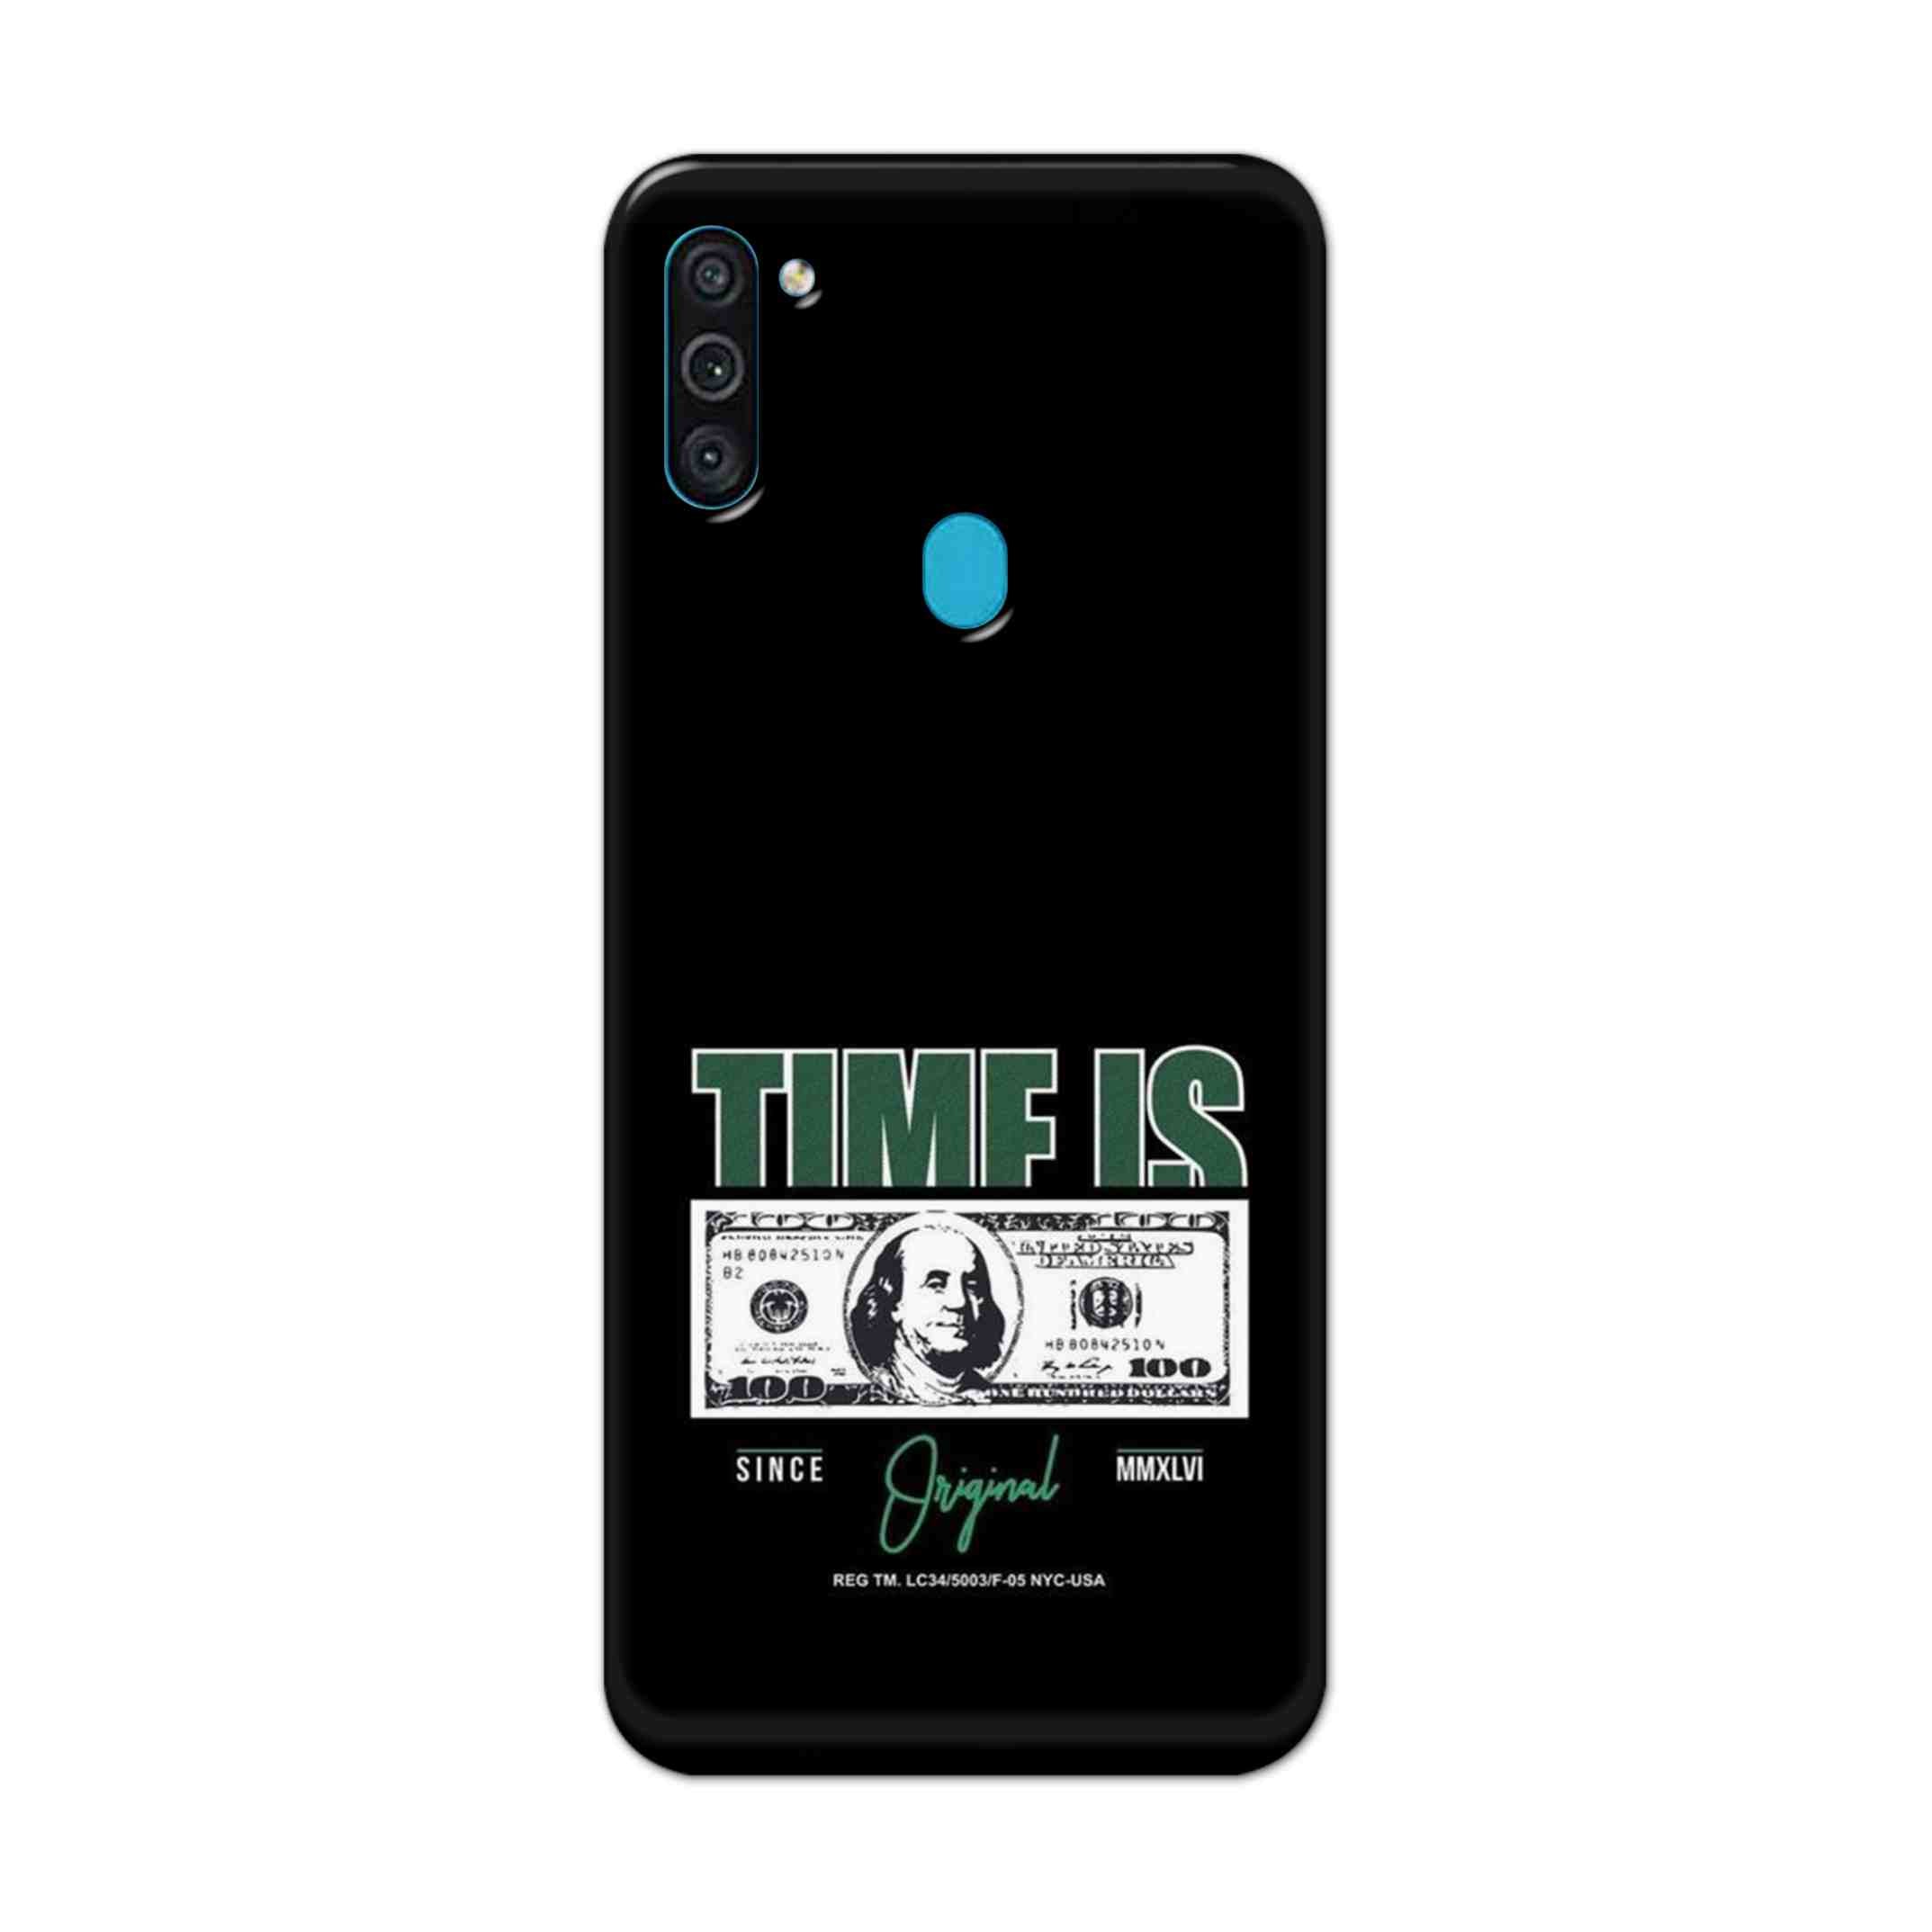 Buy Time Is Money Hard Back Mobile Phone Case Cover For Samsung Galaxy M11 Online